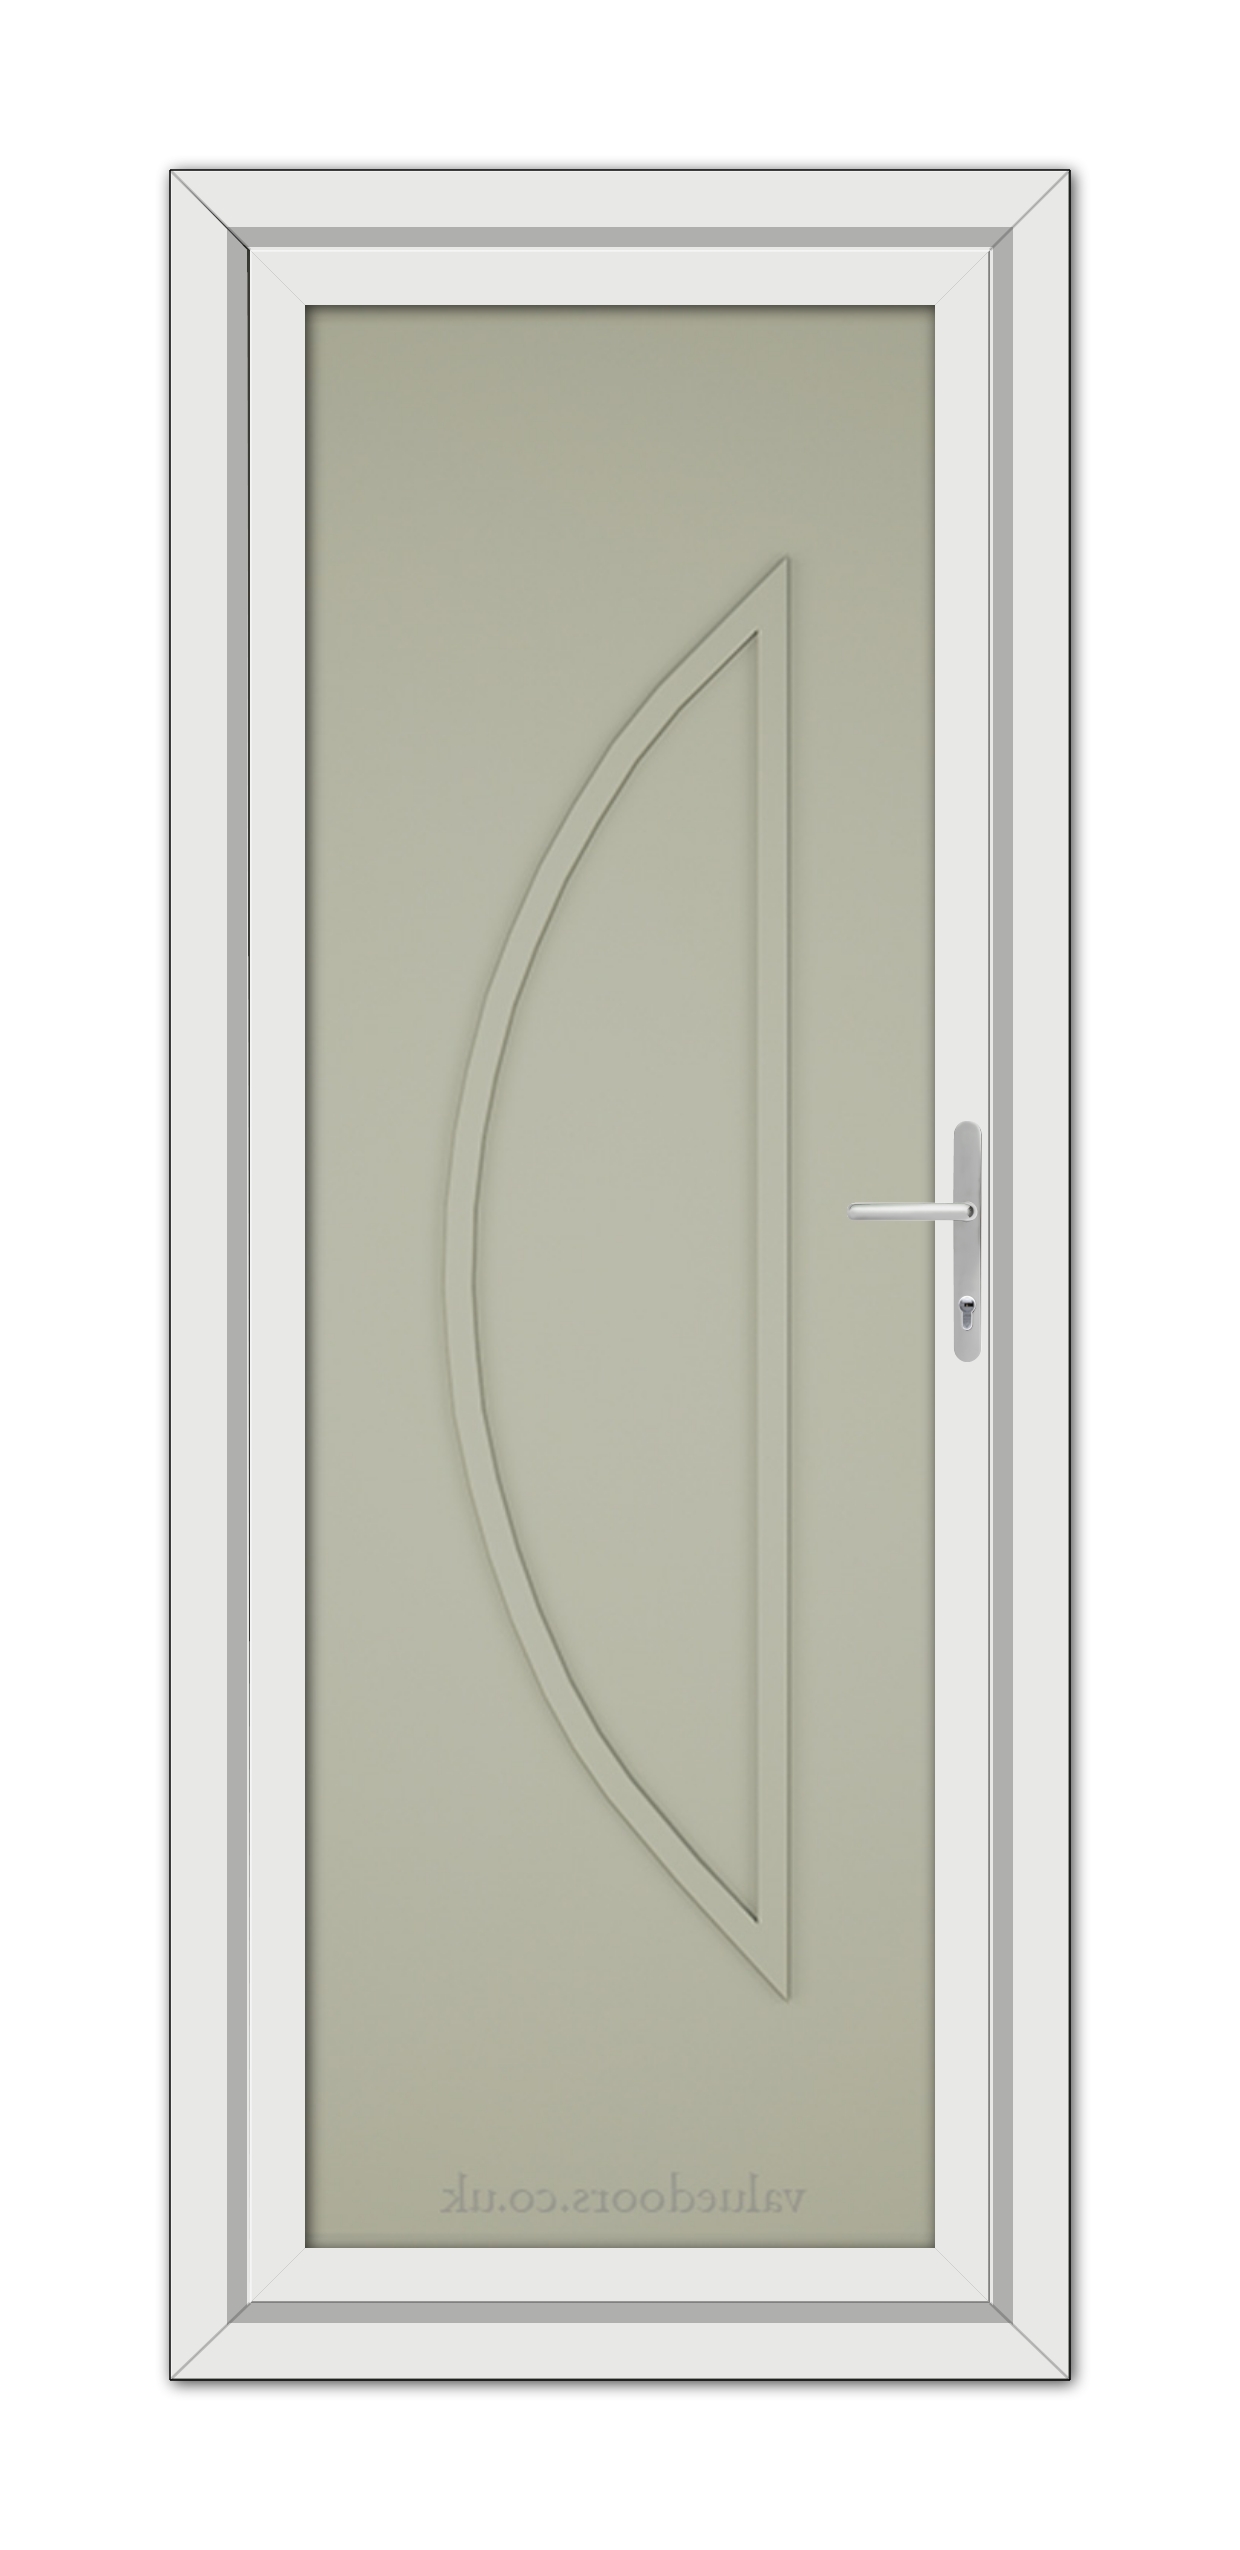 A Agate Grey Modern 5051 Solid uPVC door with an elegantly curved raised panel design and a metallic handle, set within a white frame.